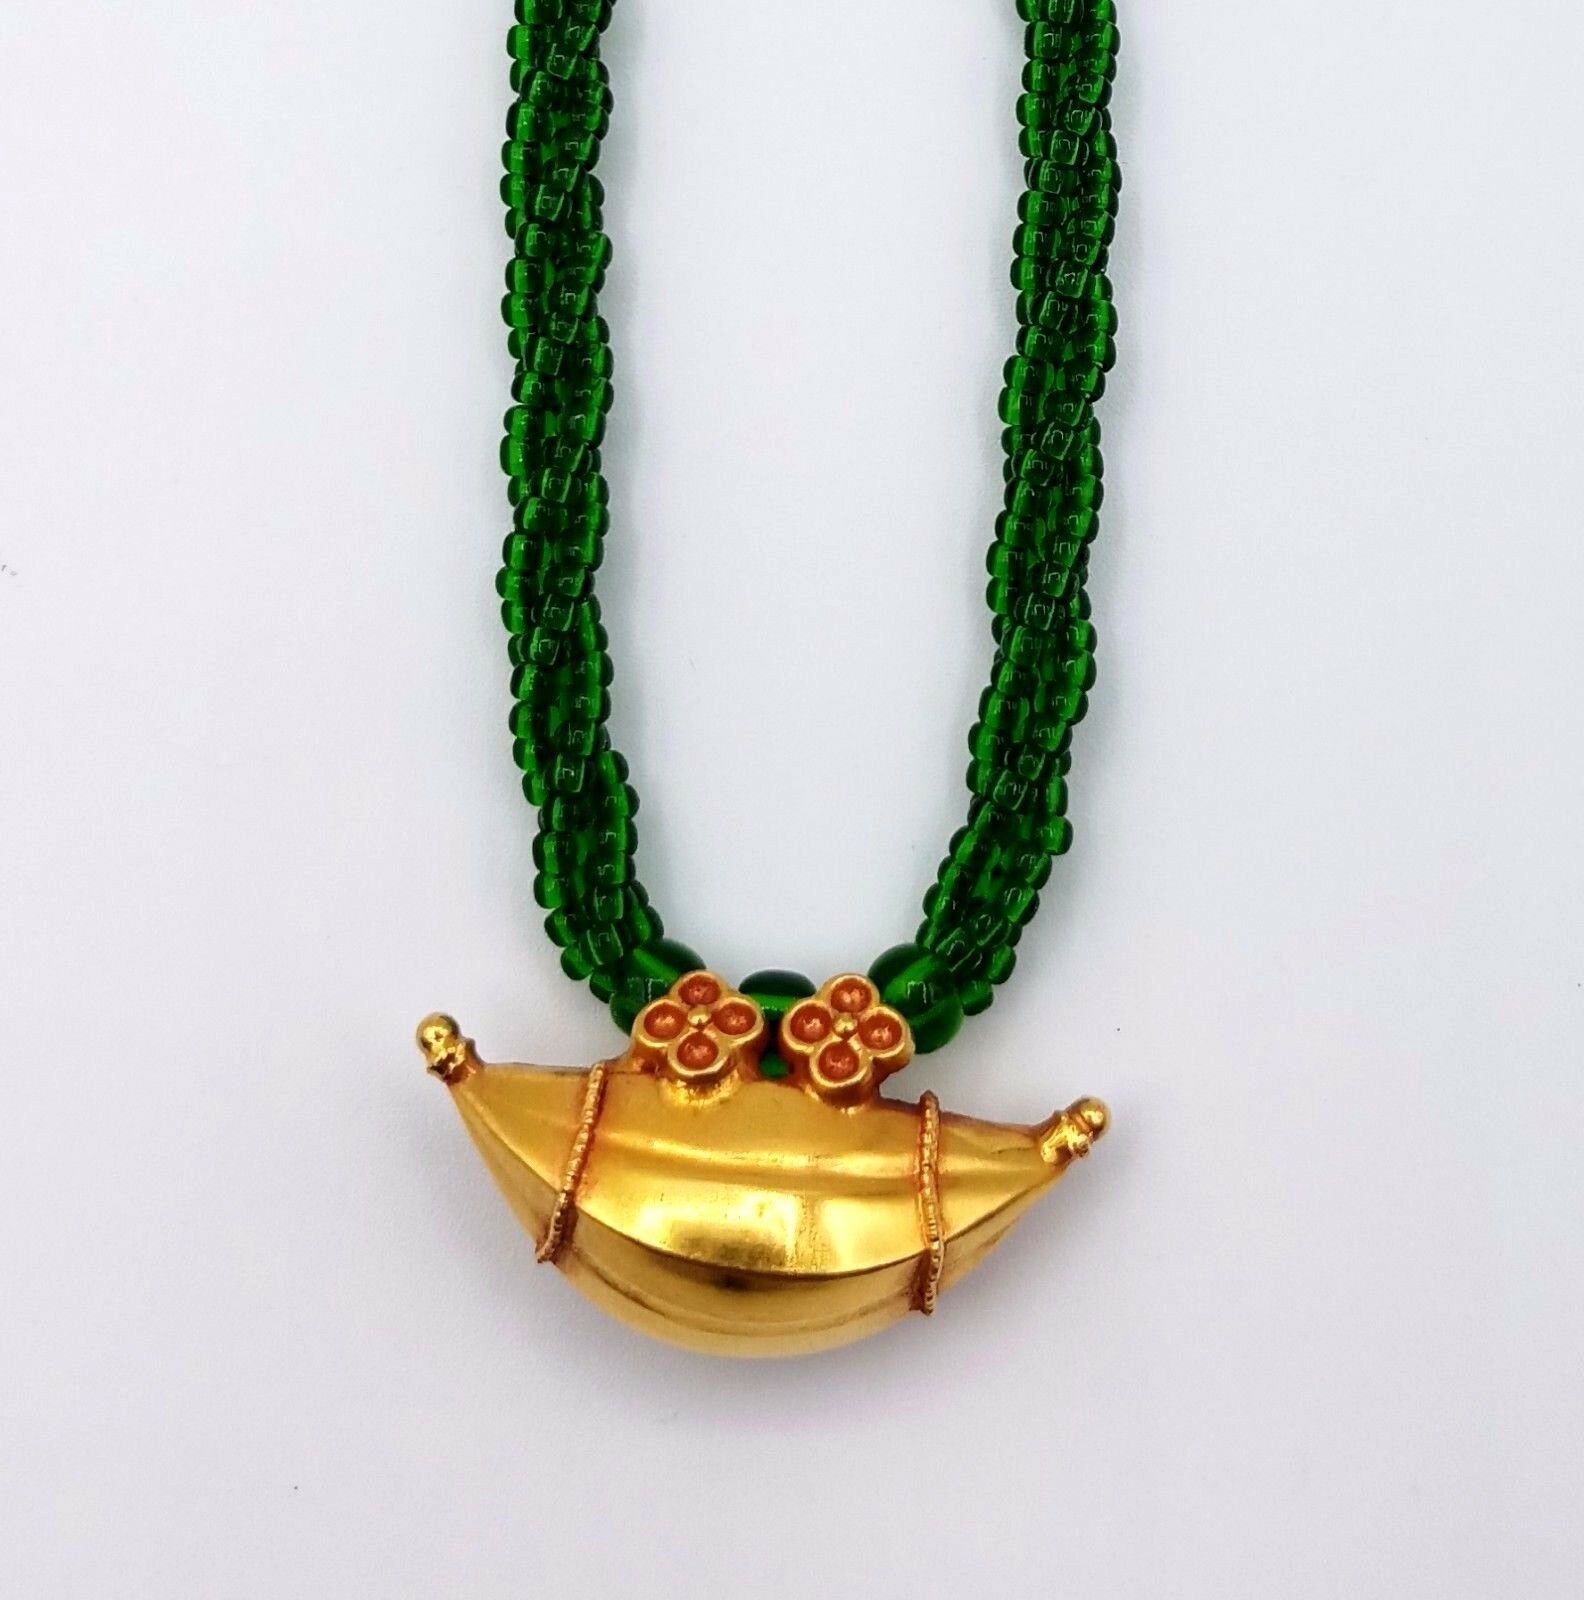 Primary image for VINTAGE DESIGN18KT GOLD JEWELRY GREEN COLOR BEADS NECKLACE PENDANT AMULET 